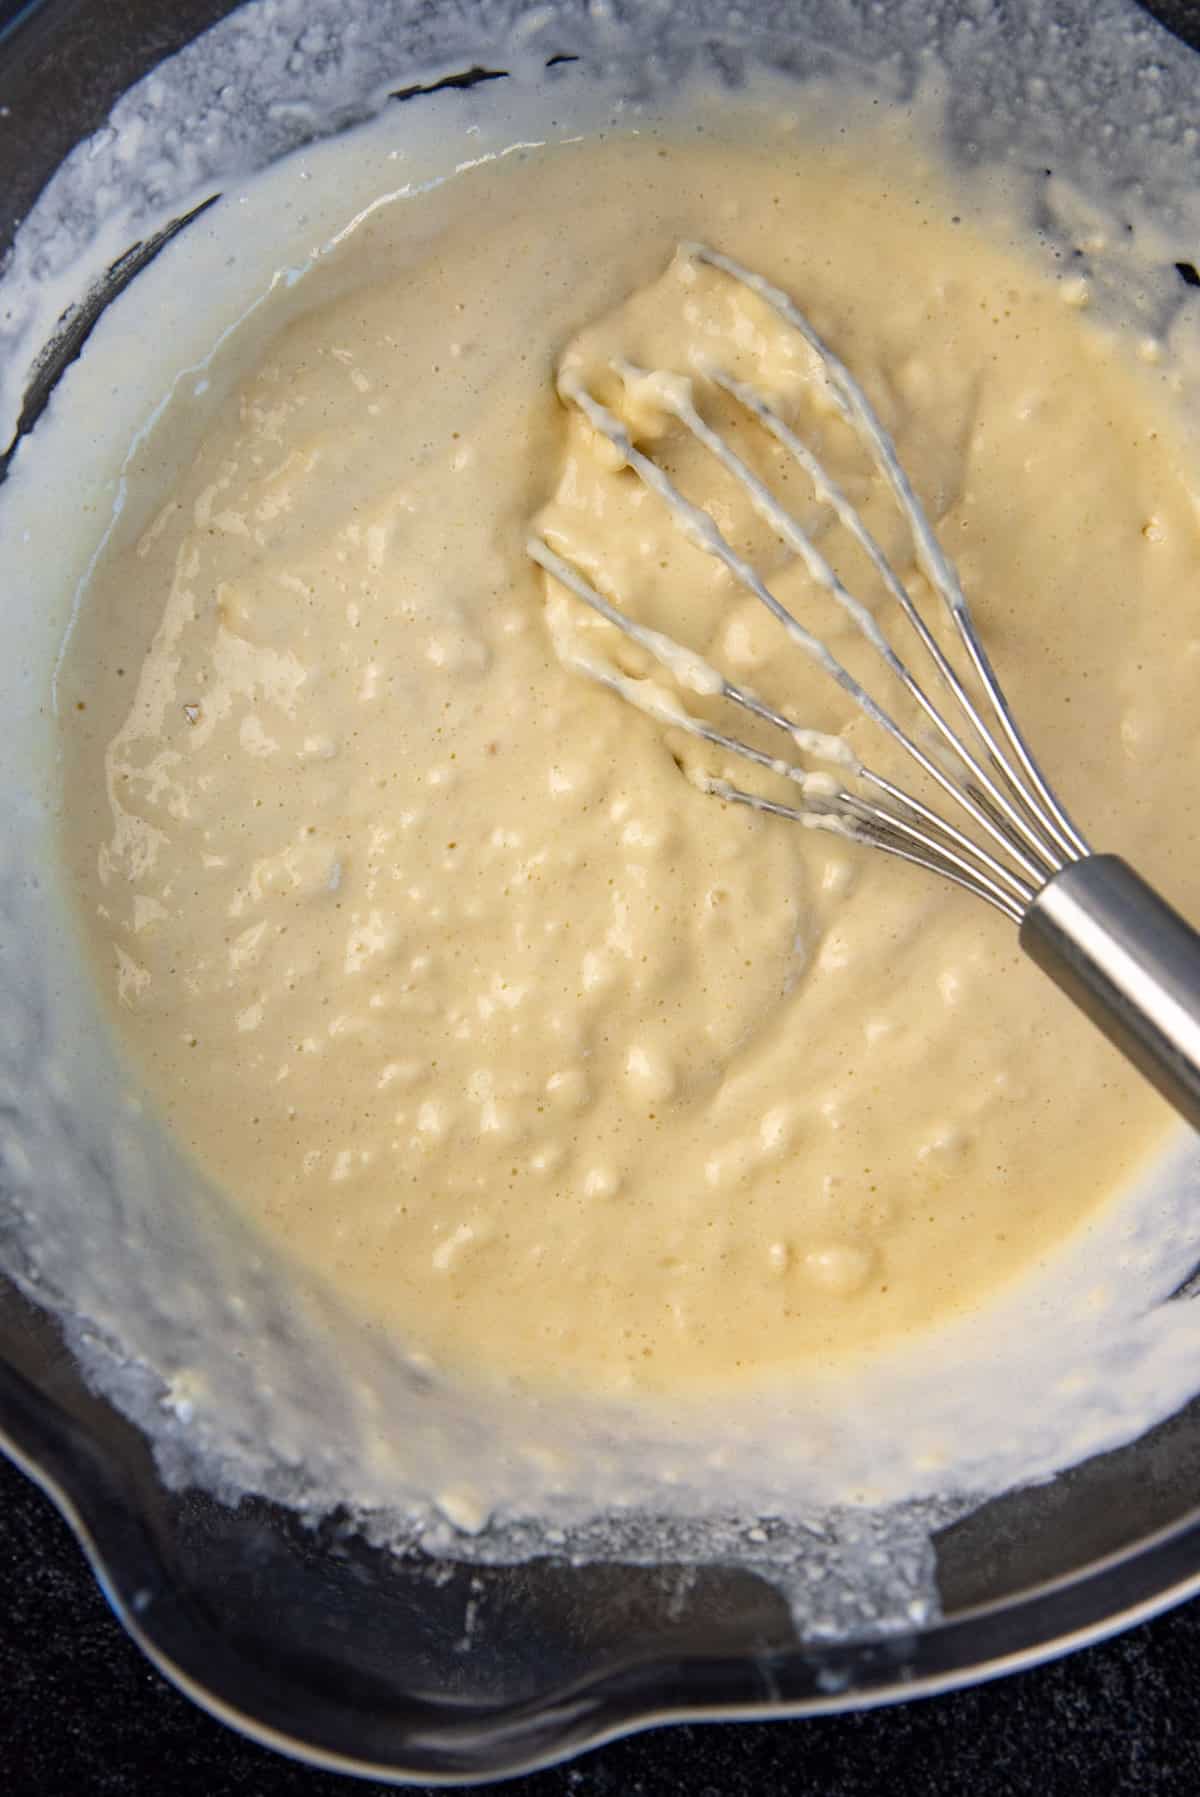 A close up of the pancake batter after mixing with the whisk, showing the lumpy consistency.